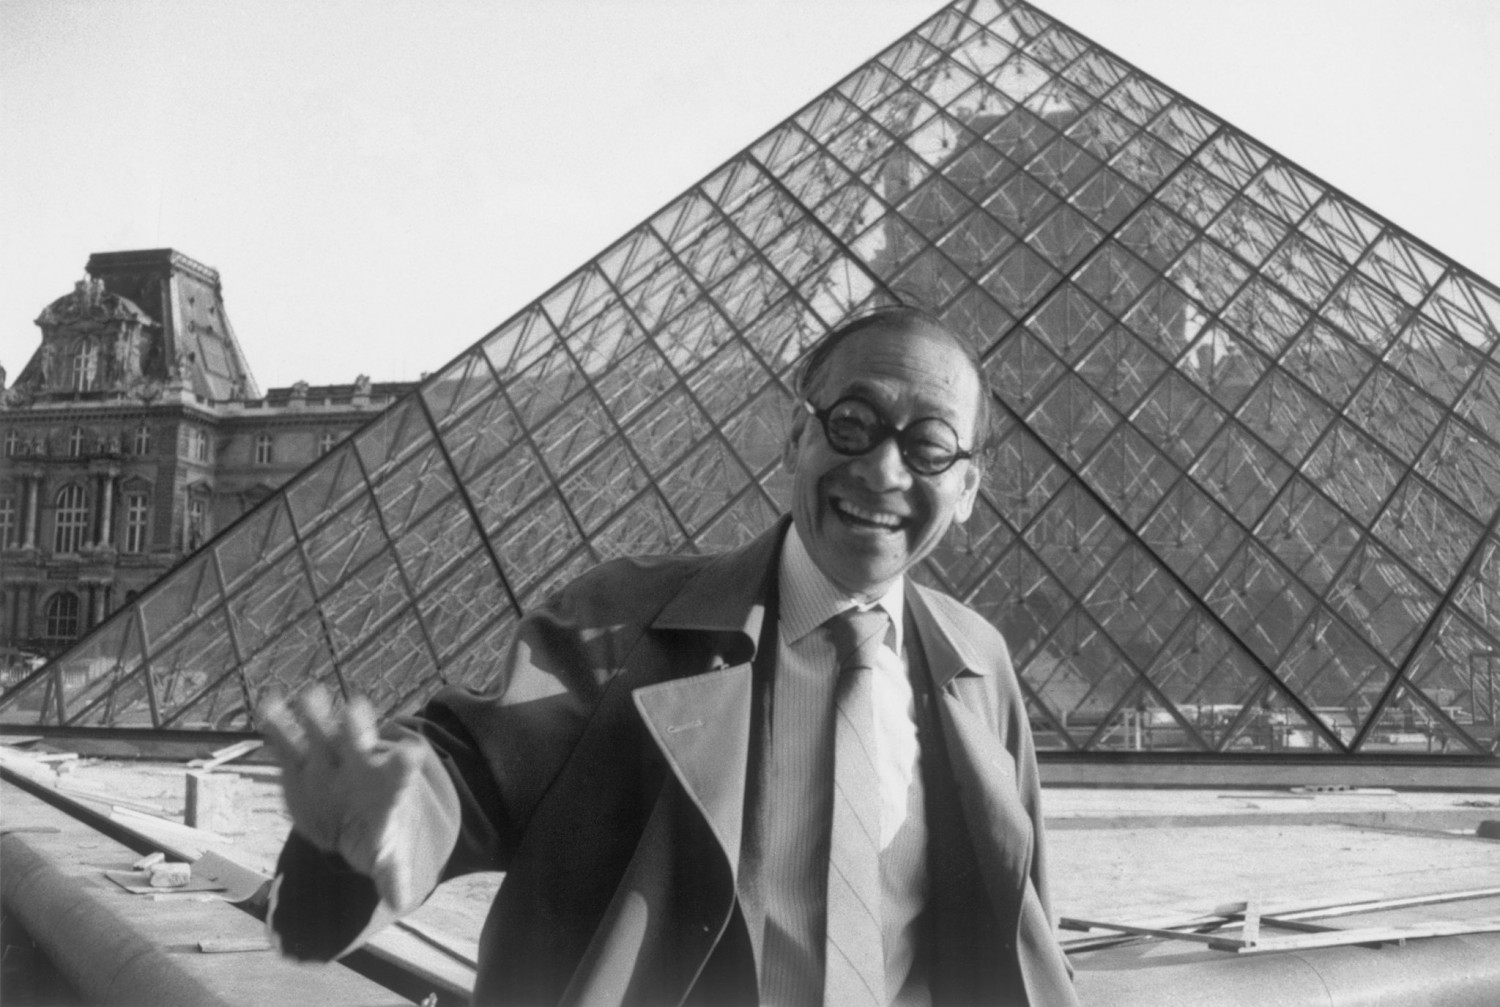 I.M. Pei in 1989 outside the glass pyramid he designed at the Louvre in Paris, one of his most famous commissions. “If there’s one thing I know I didn’t do wrong, it’s the Louvre,” he said.CreditCreditMarc Riboud/Magnum Photos